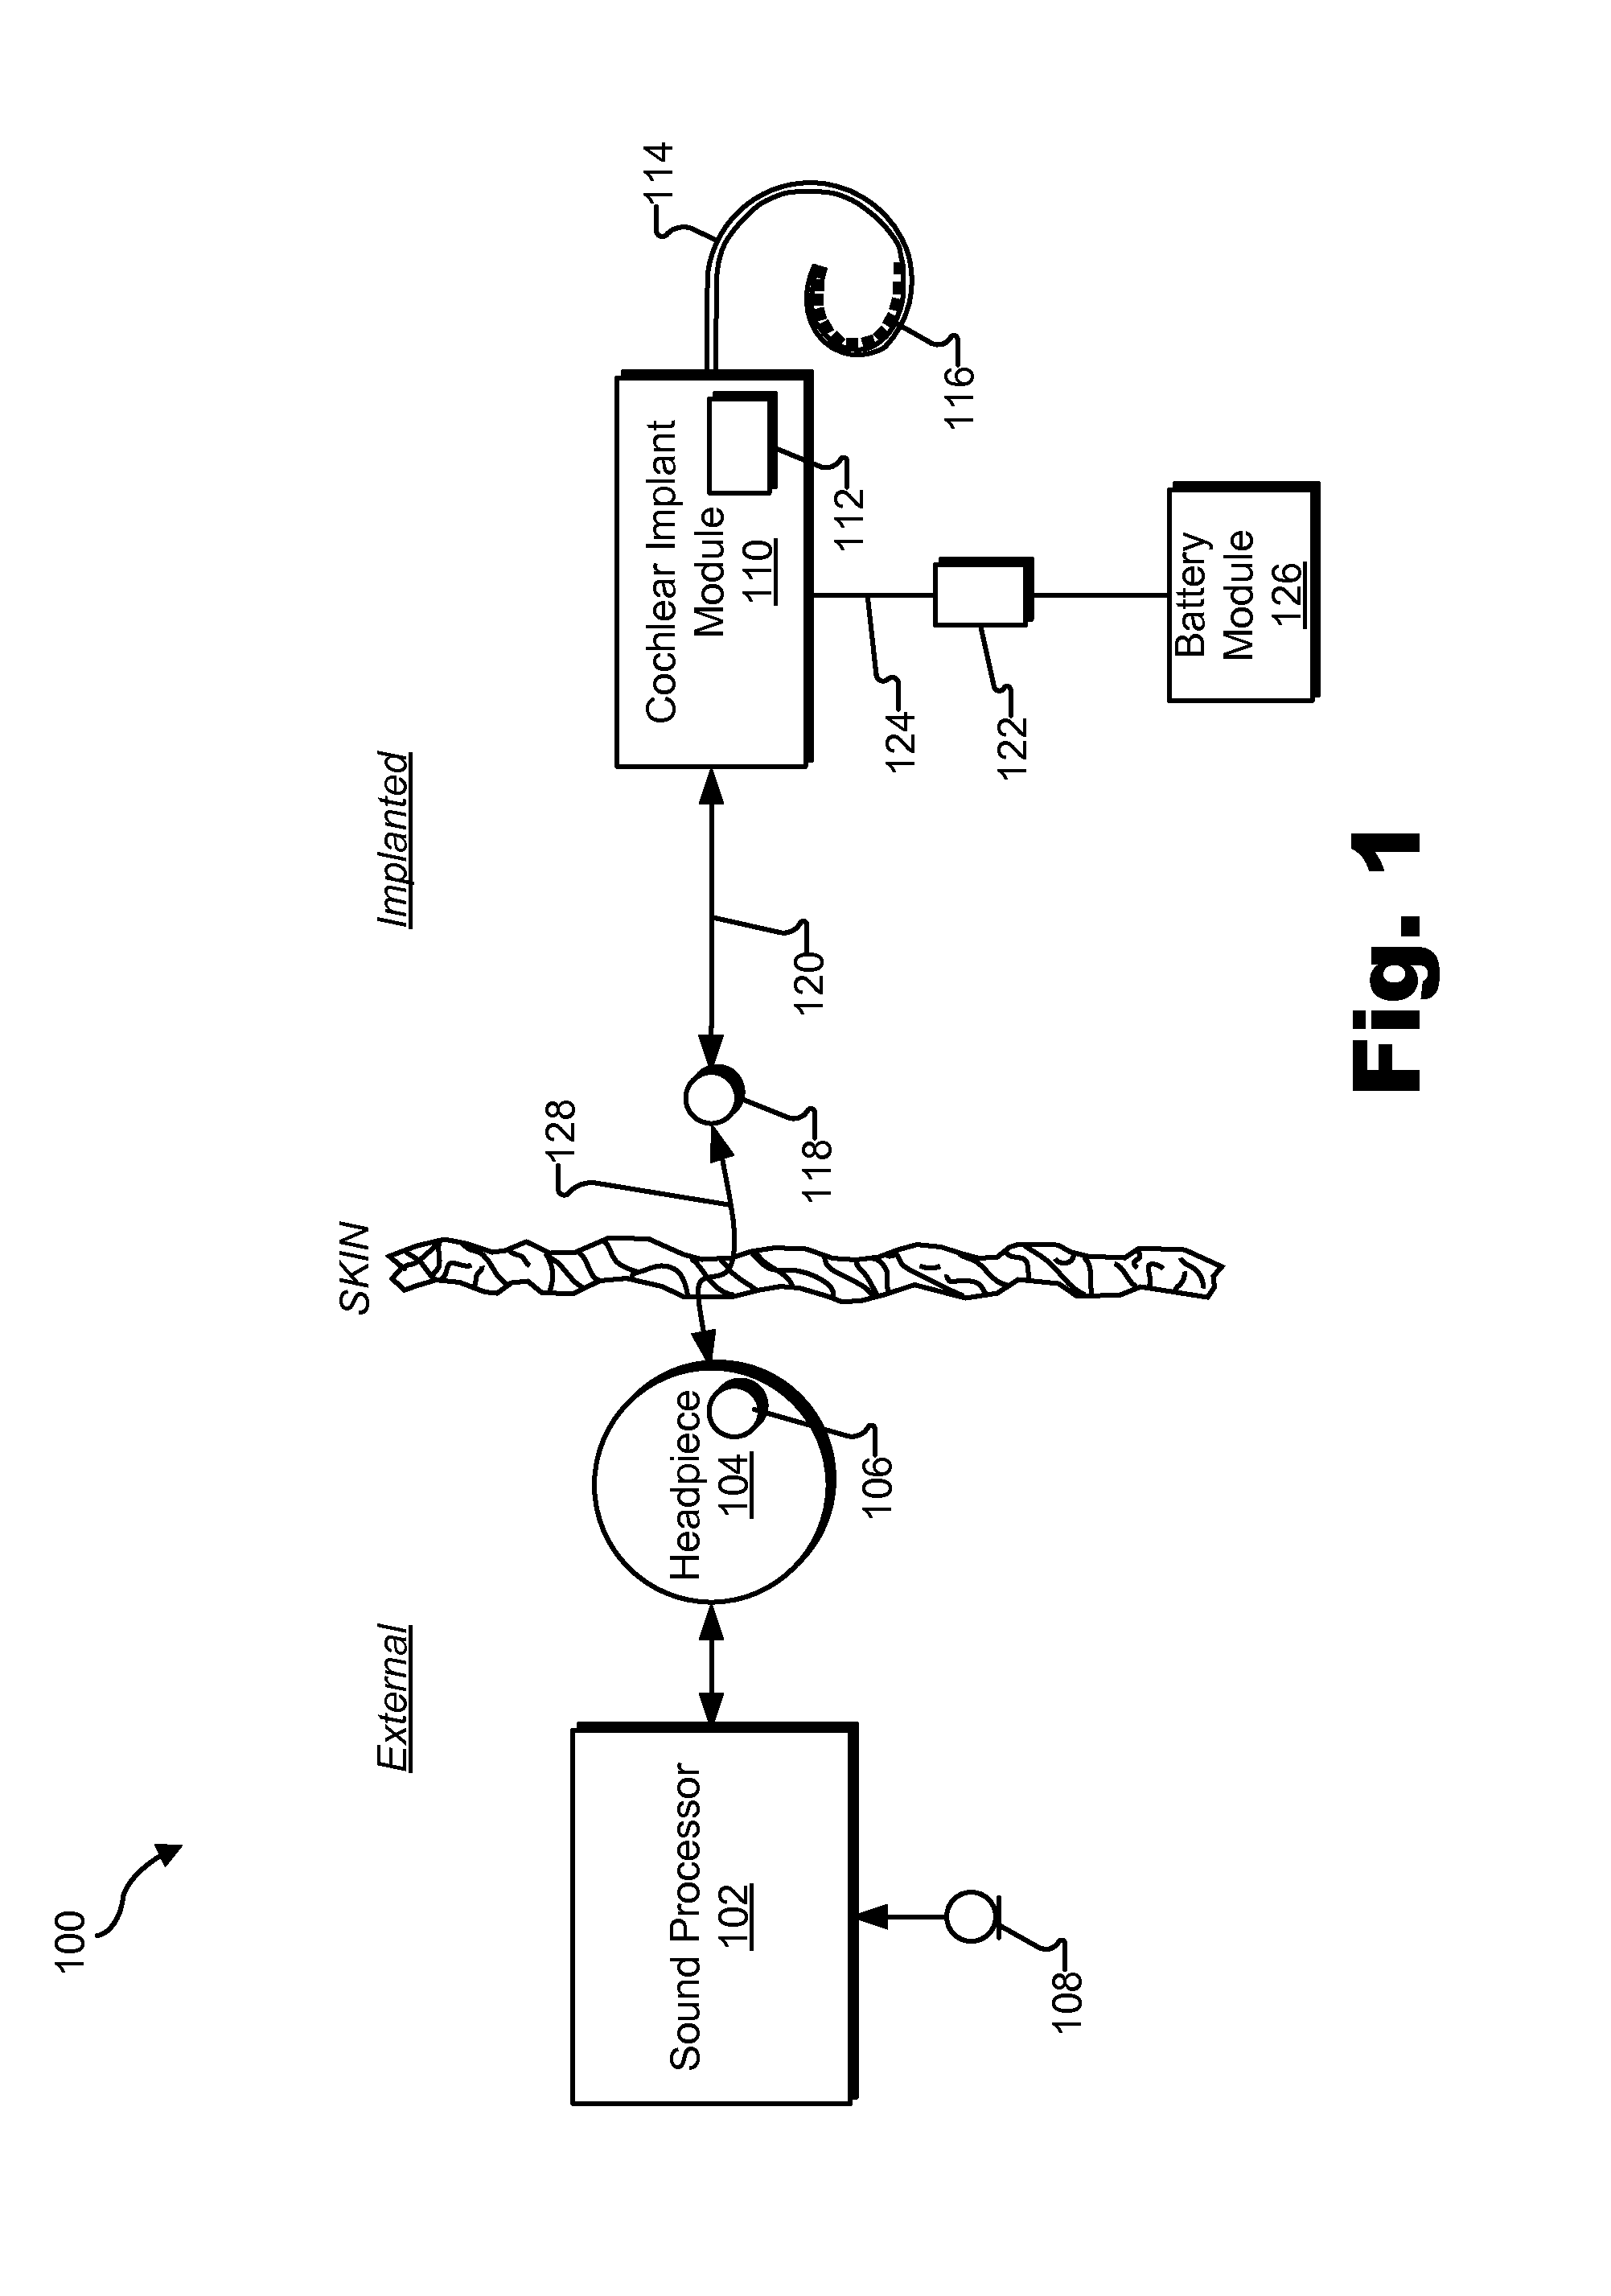 Connectorized cochlear implant systems